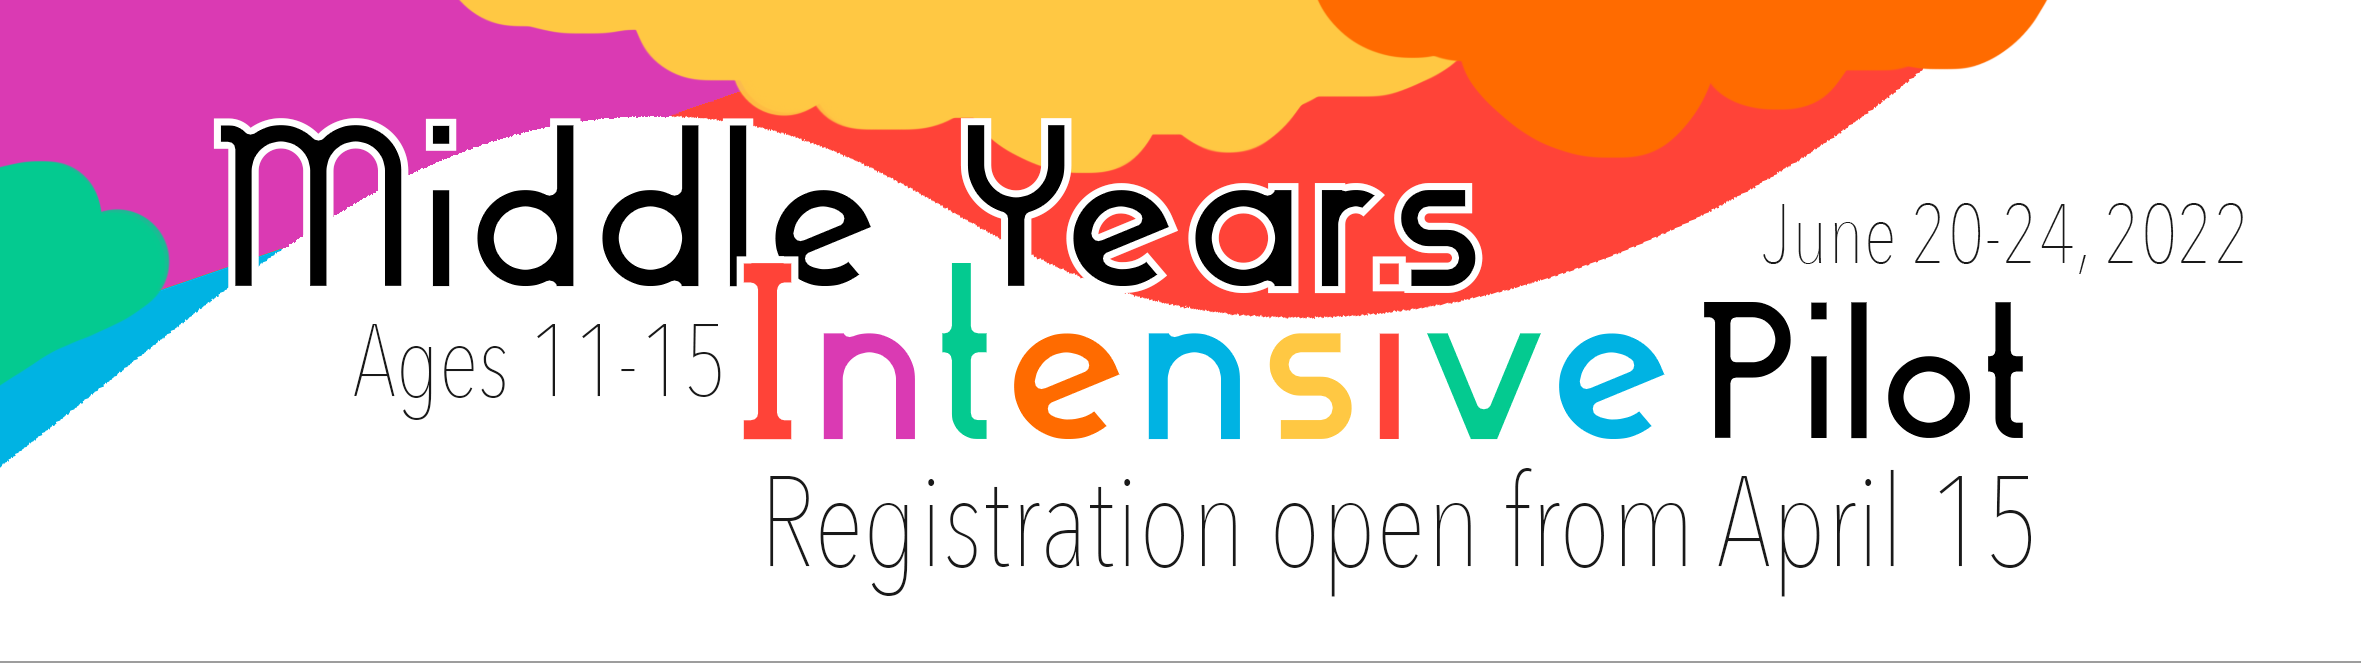 bannare reading Middle Years Intensive Pilot from June 20 to 24, 2022. For ages 11-15. Registration opens April 11